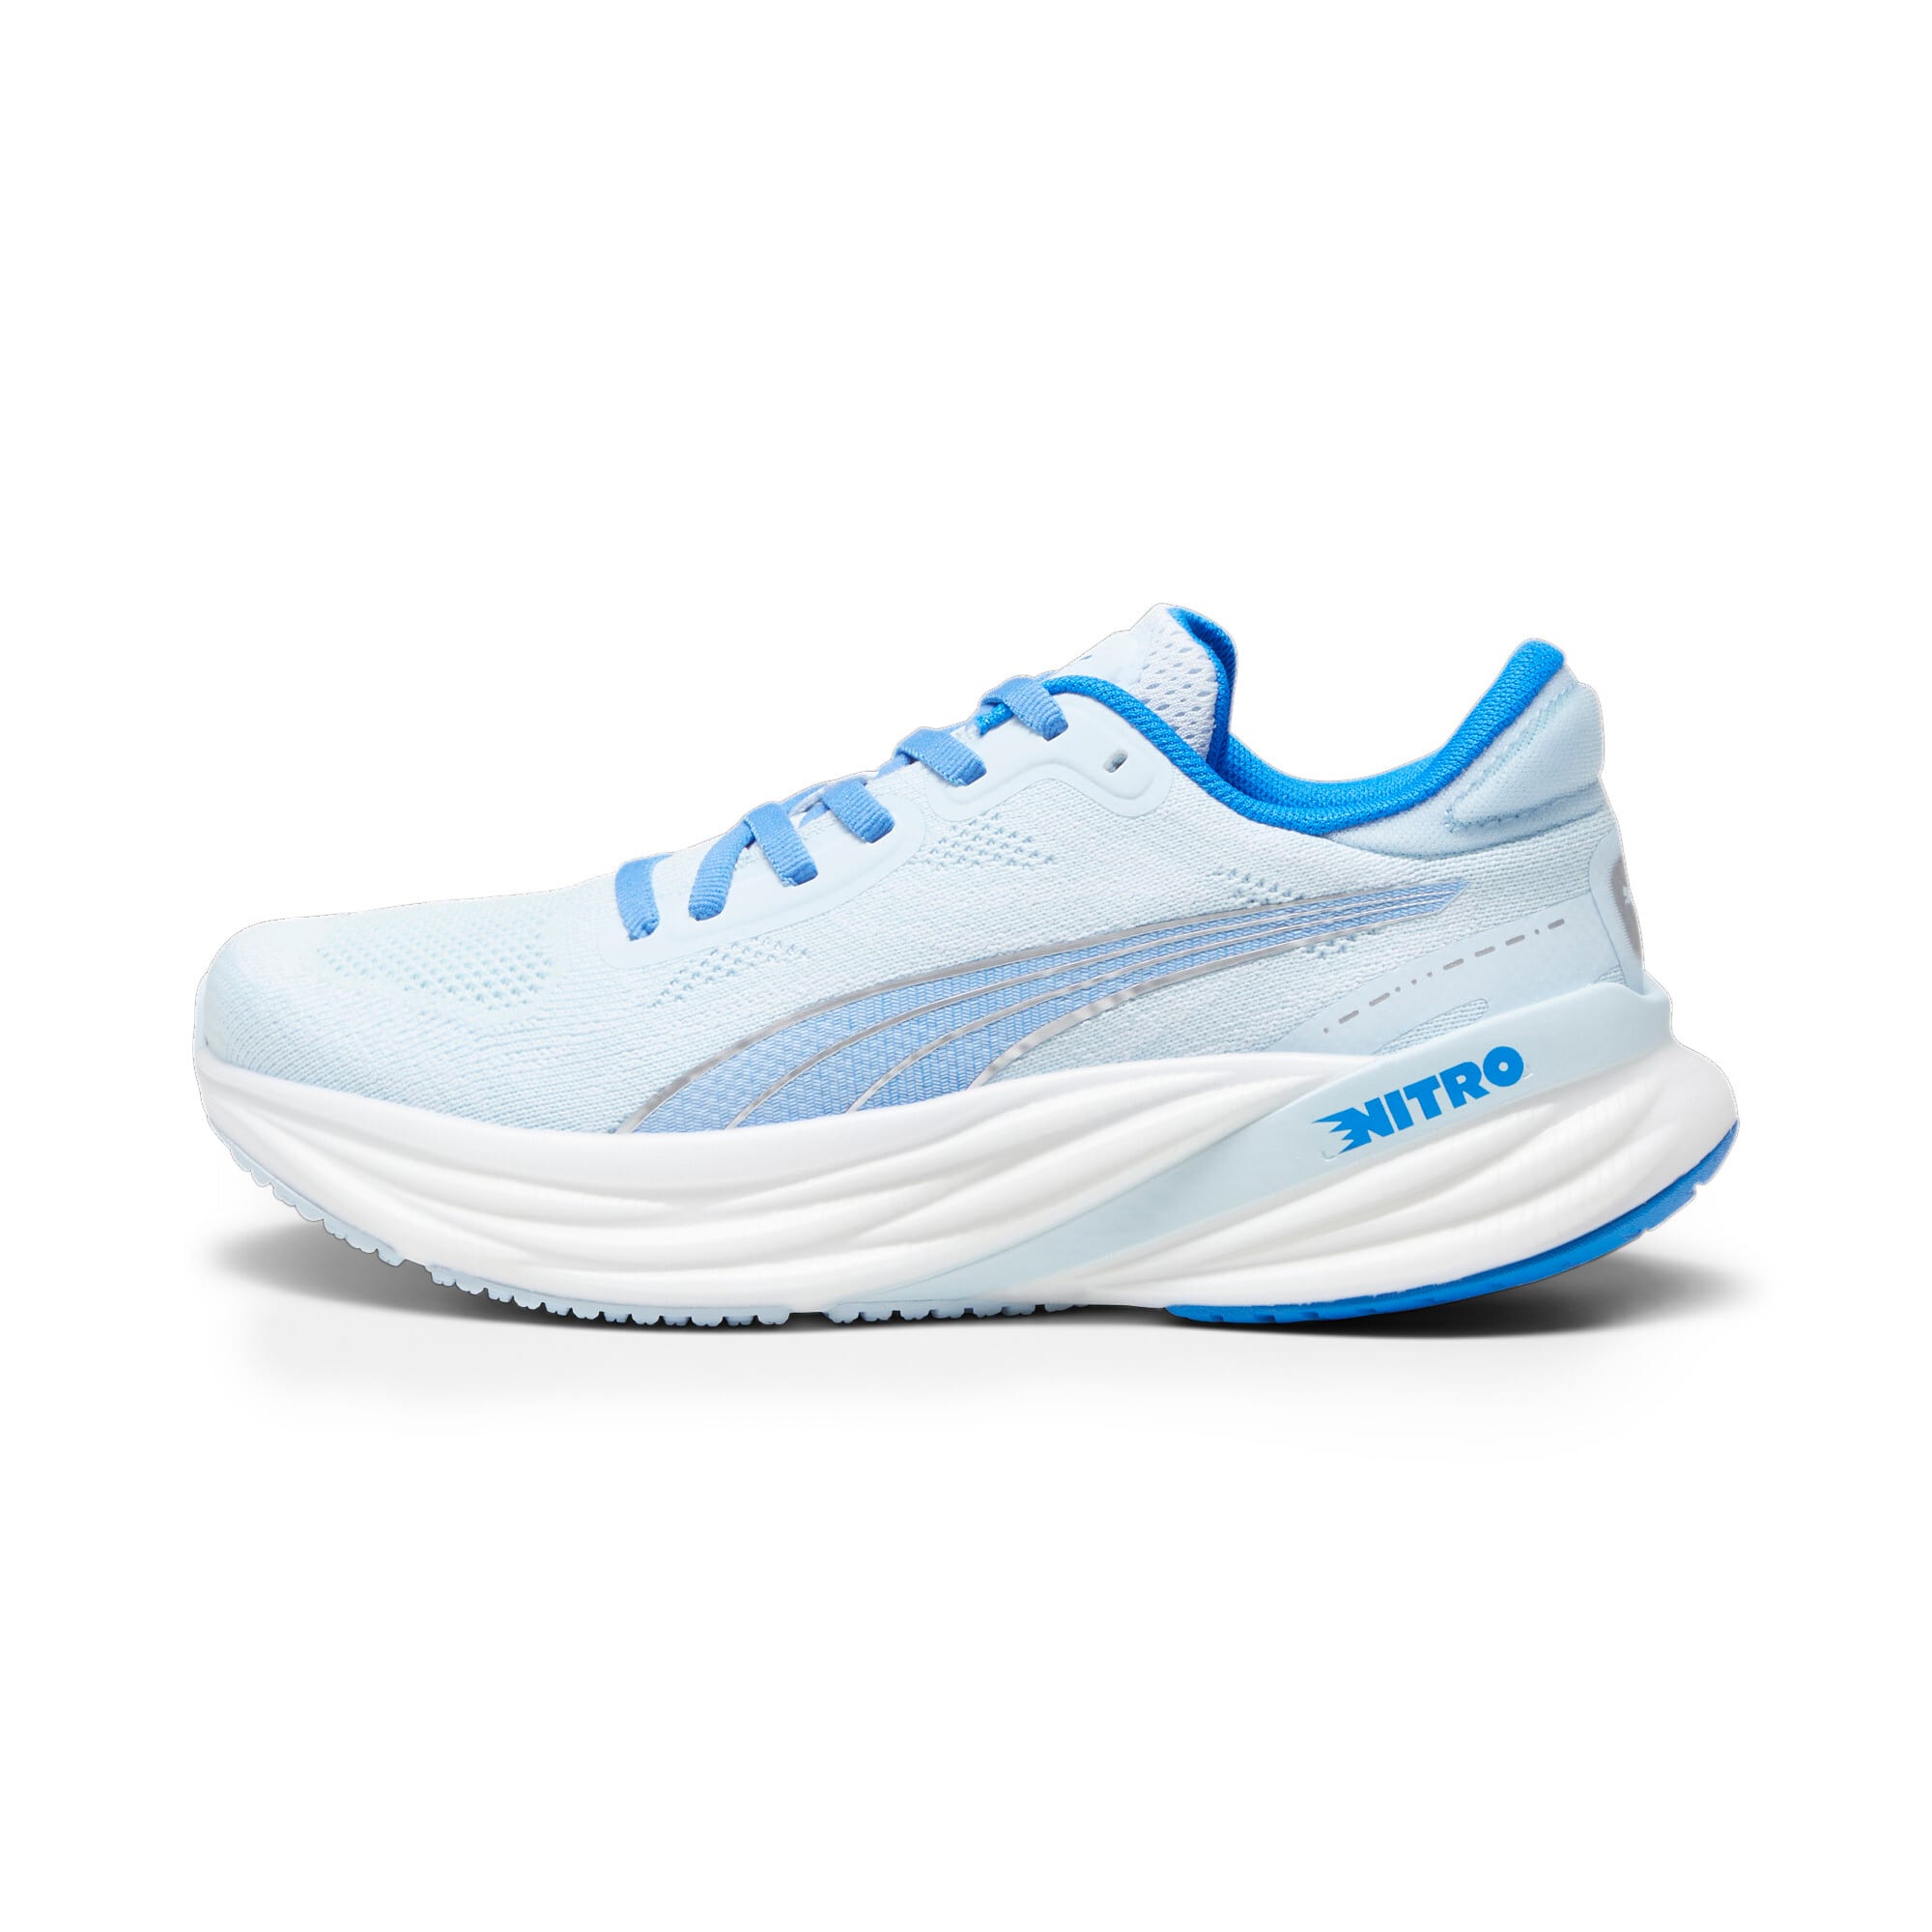 Puma Deviate Nitro 2 Running Womens Blue Sneakers Athletic Shoes 37685510